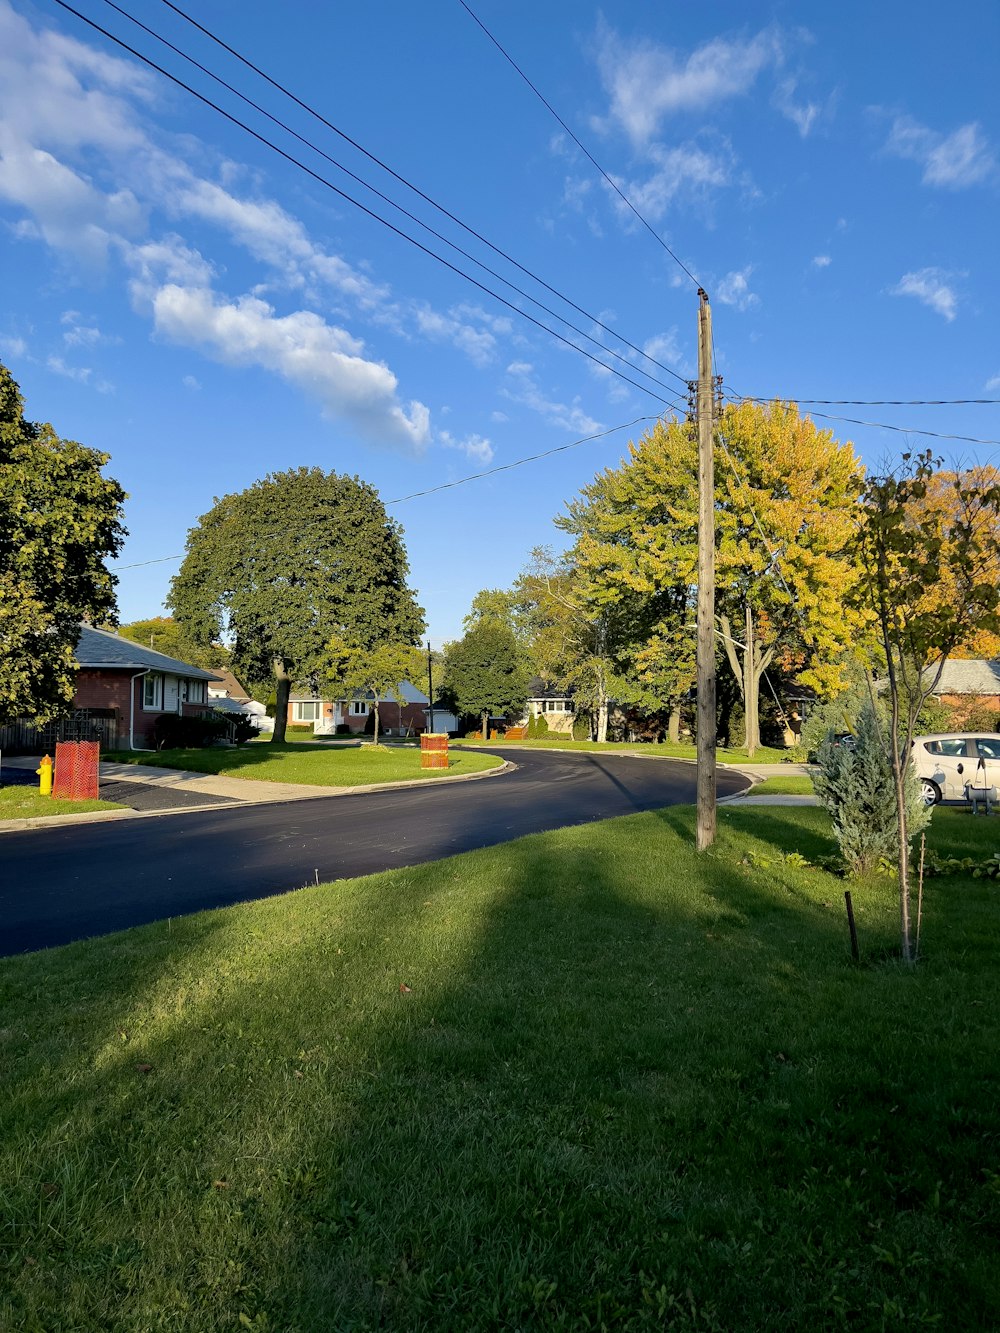 a street with houses and trees in the background